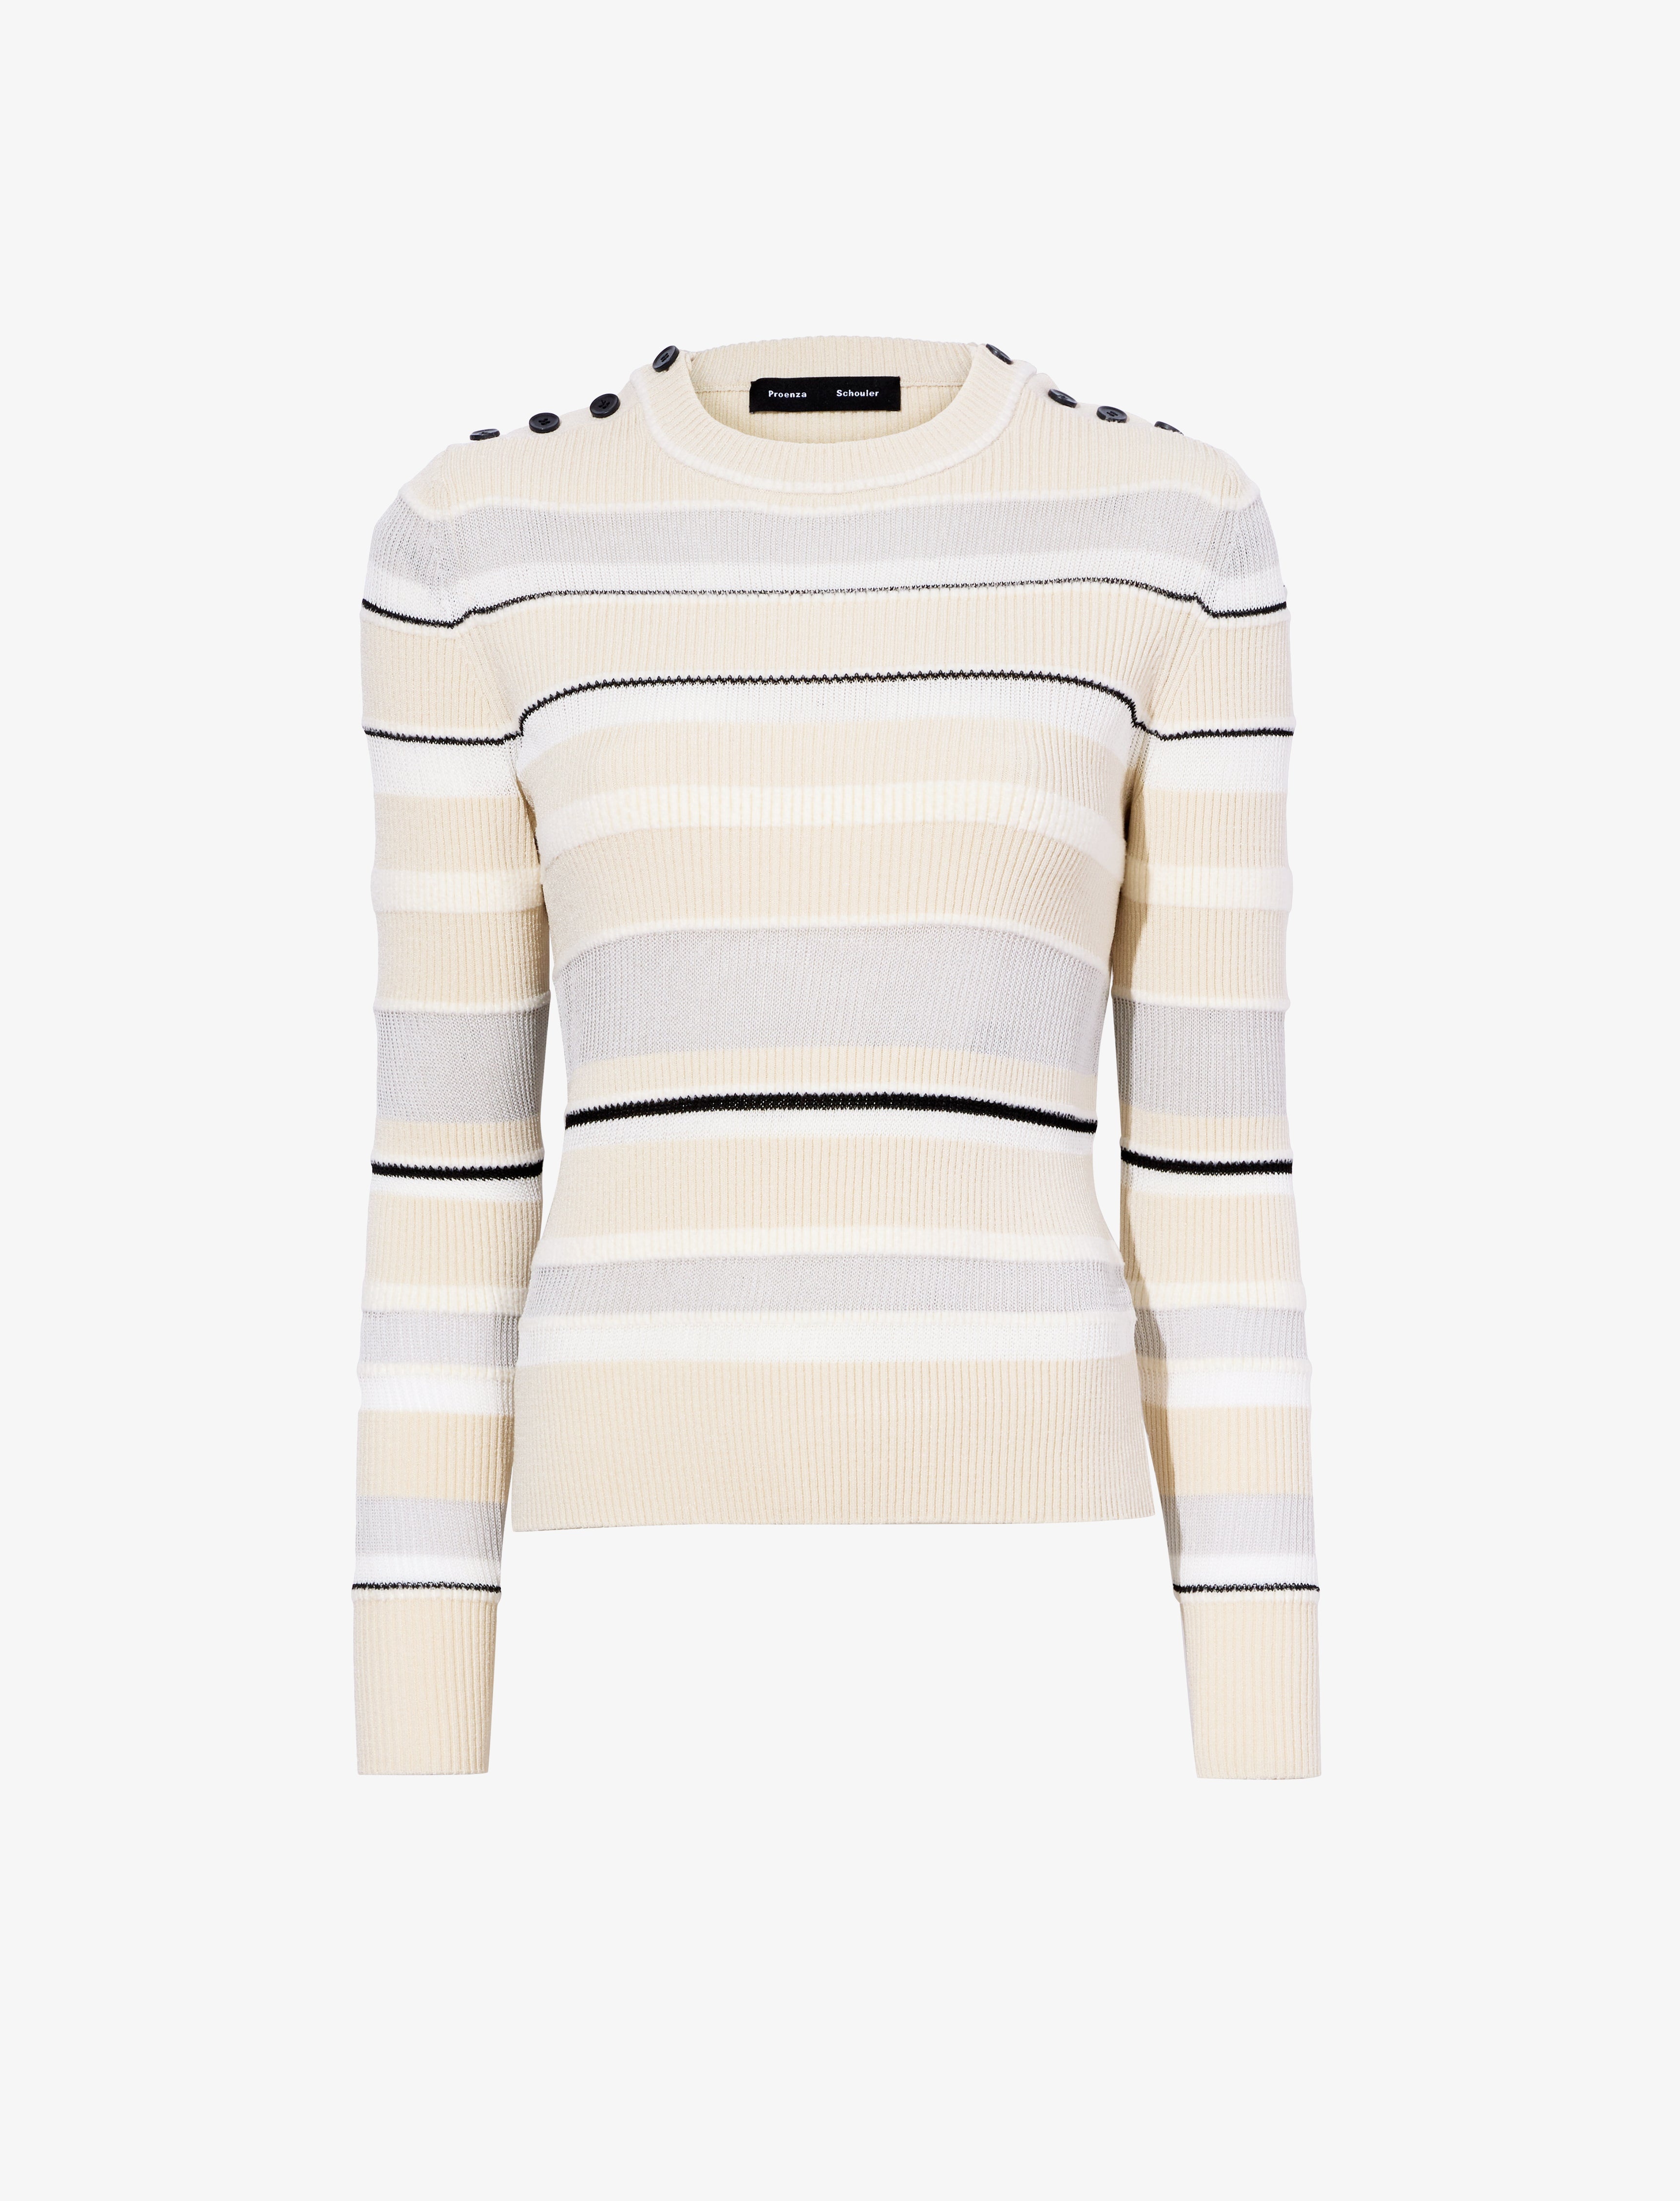 Judy Sweater in Textured Striped Knit - 1